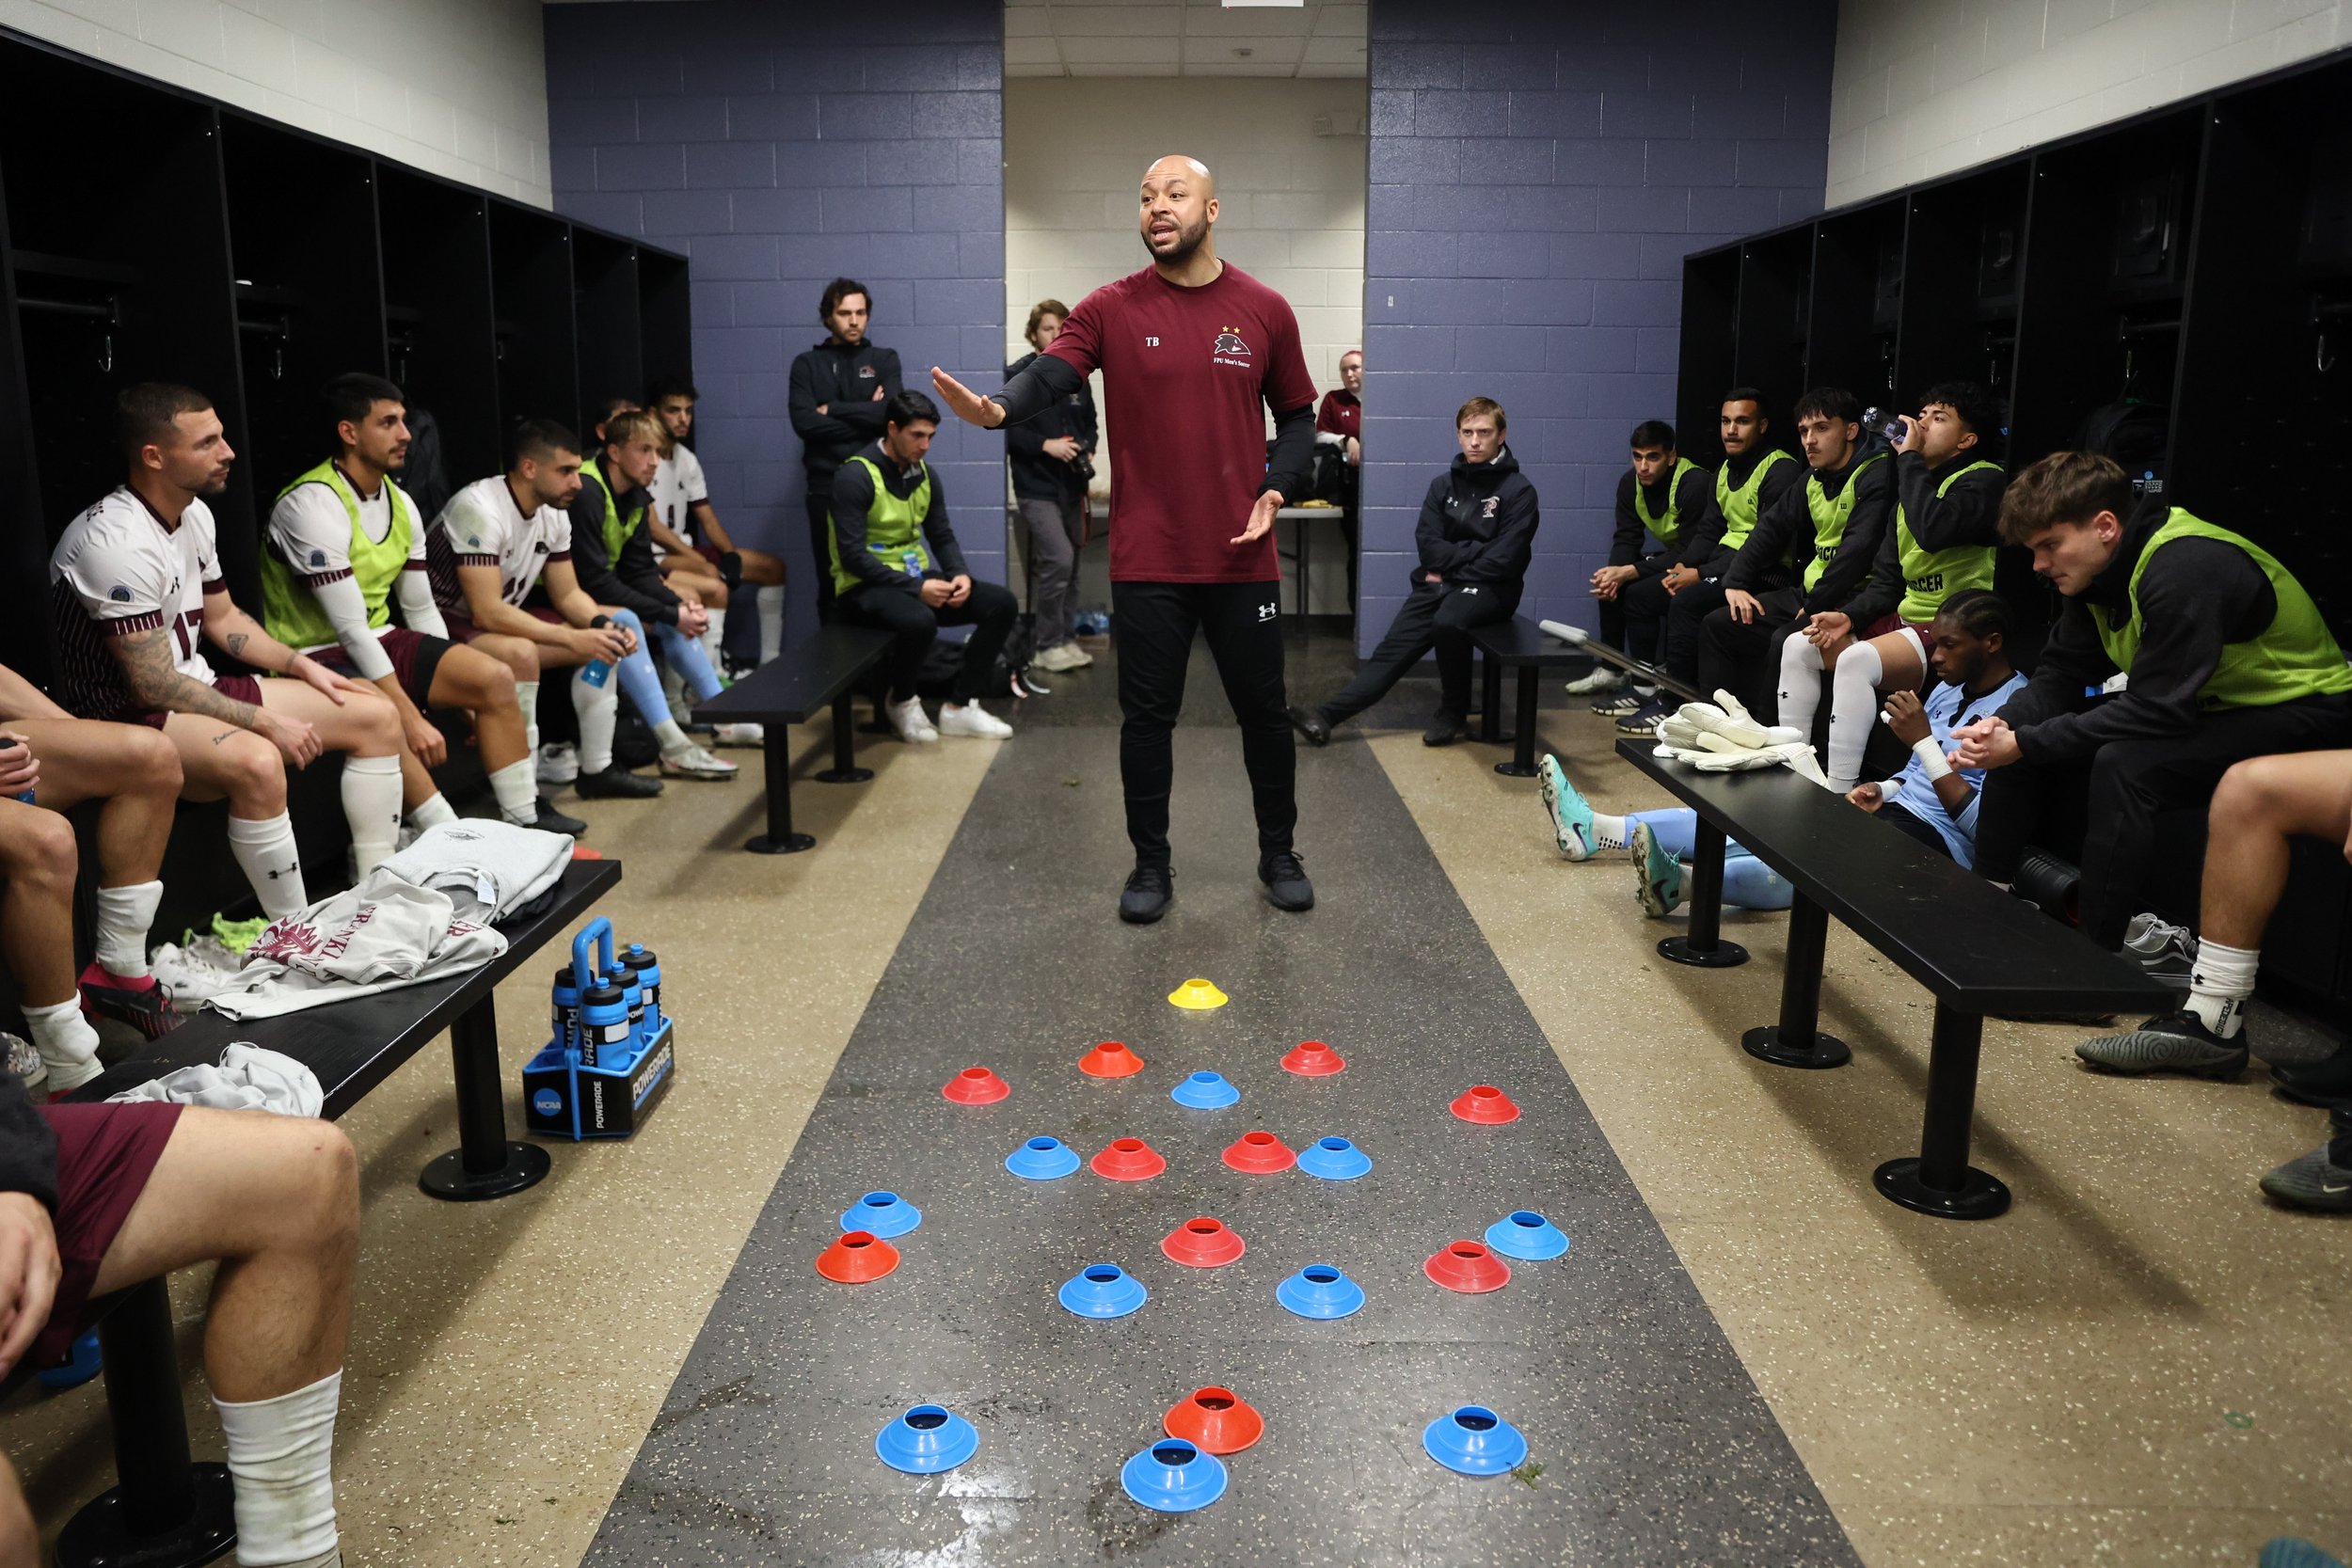  MATTHEWS, NORTH CAROLINA - DECEMBER 9: Head Coach Travis Brent of the Franklin Pierce Ravens talks to the team in the locker room during halftime of the Division II Men's Soccer Championship game against the CSU Pueblo Thunderwolves held at Sportspl